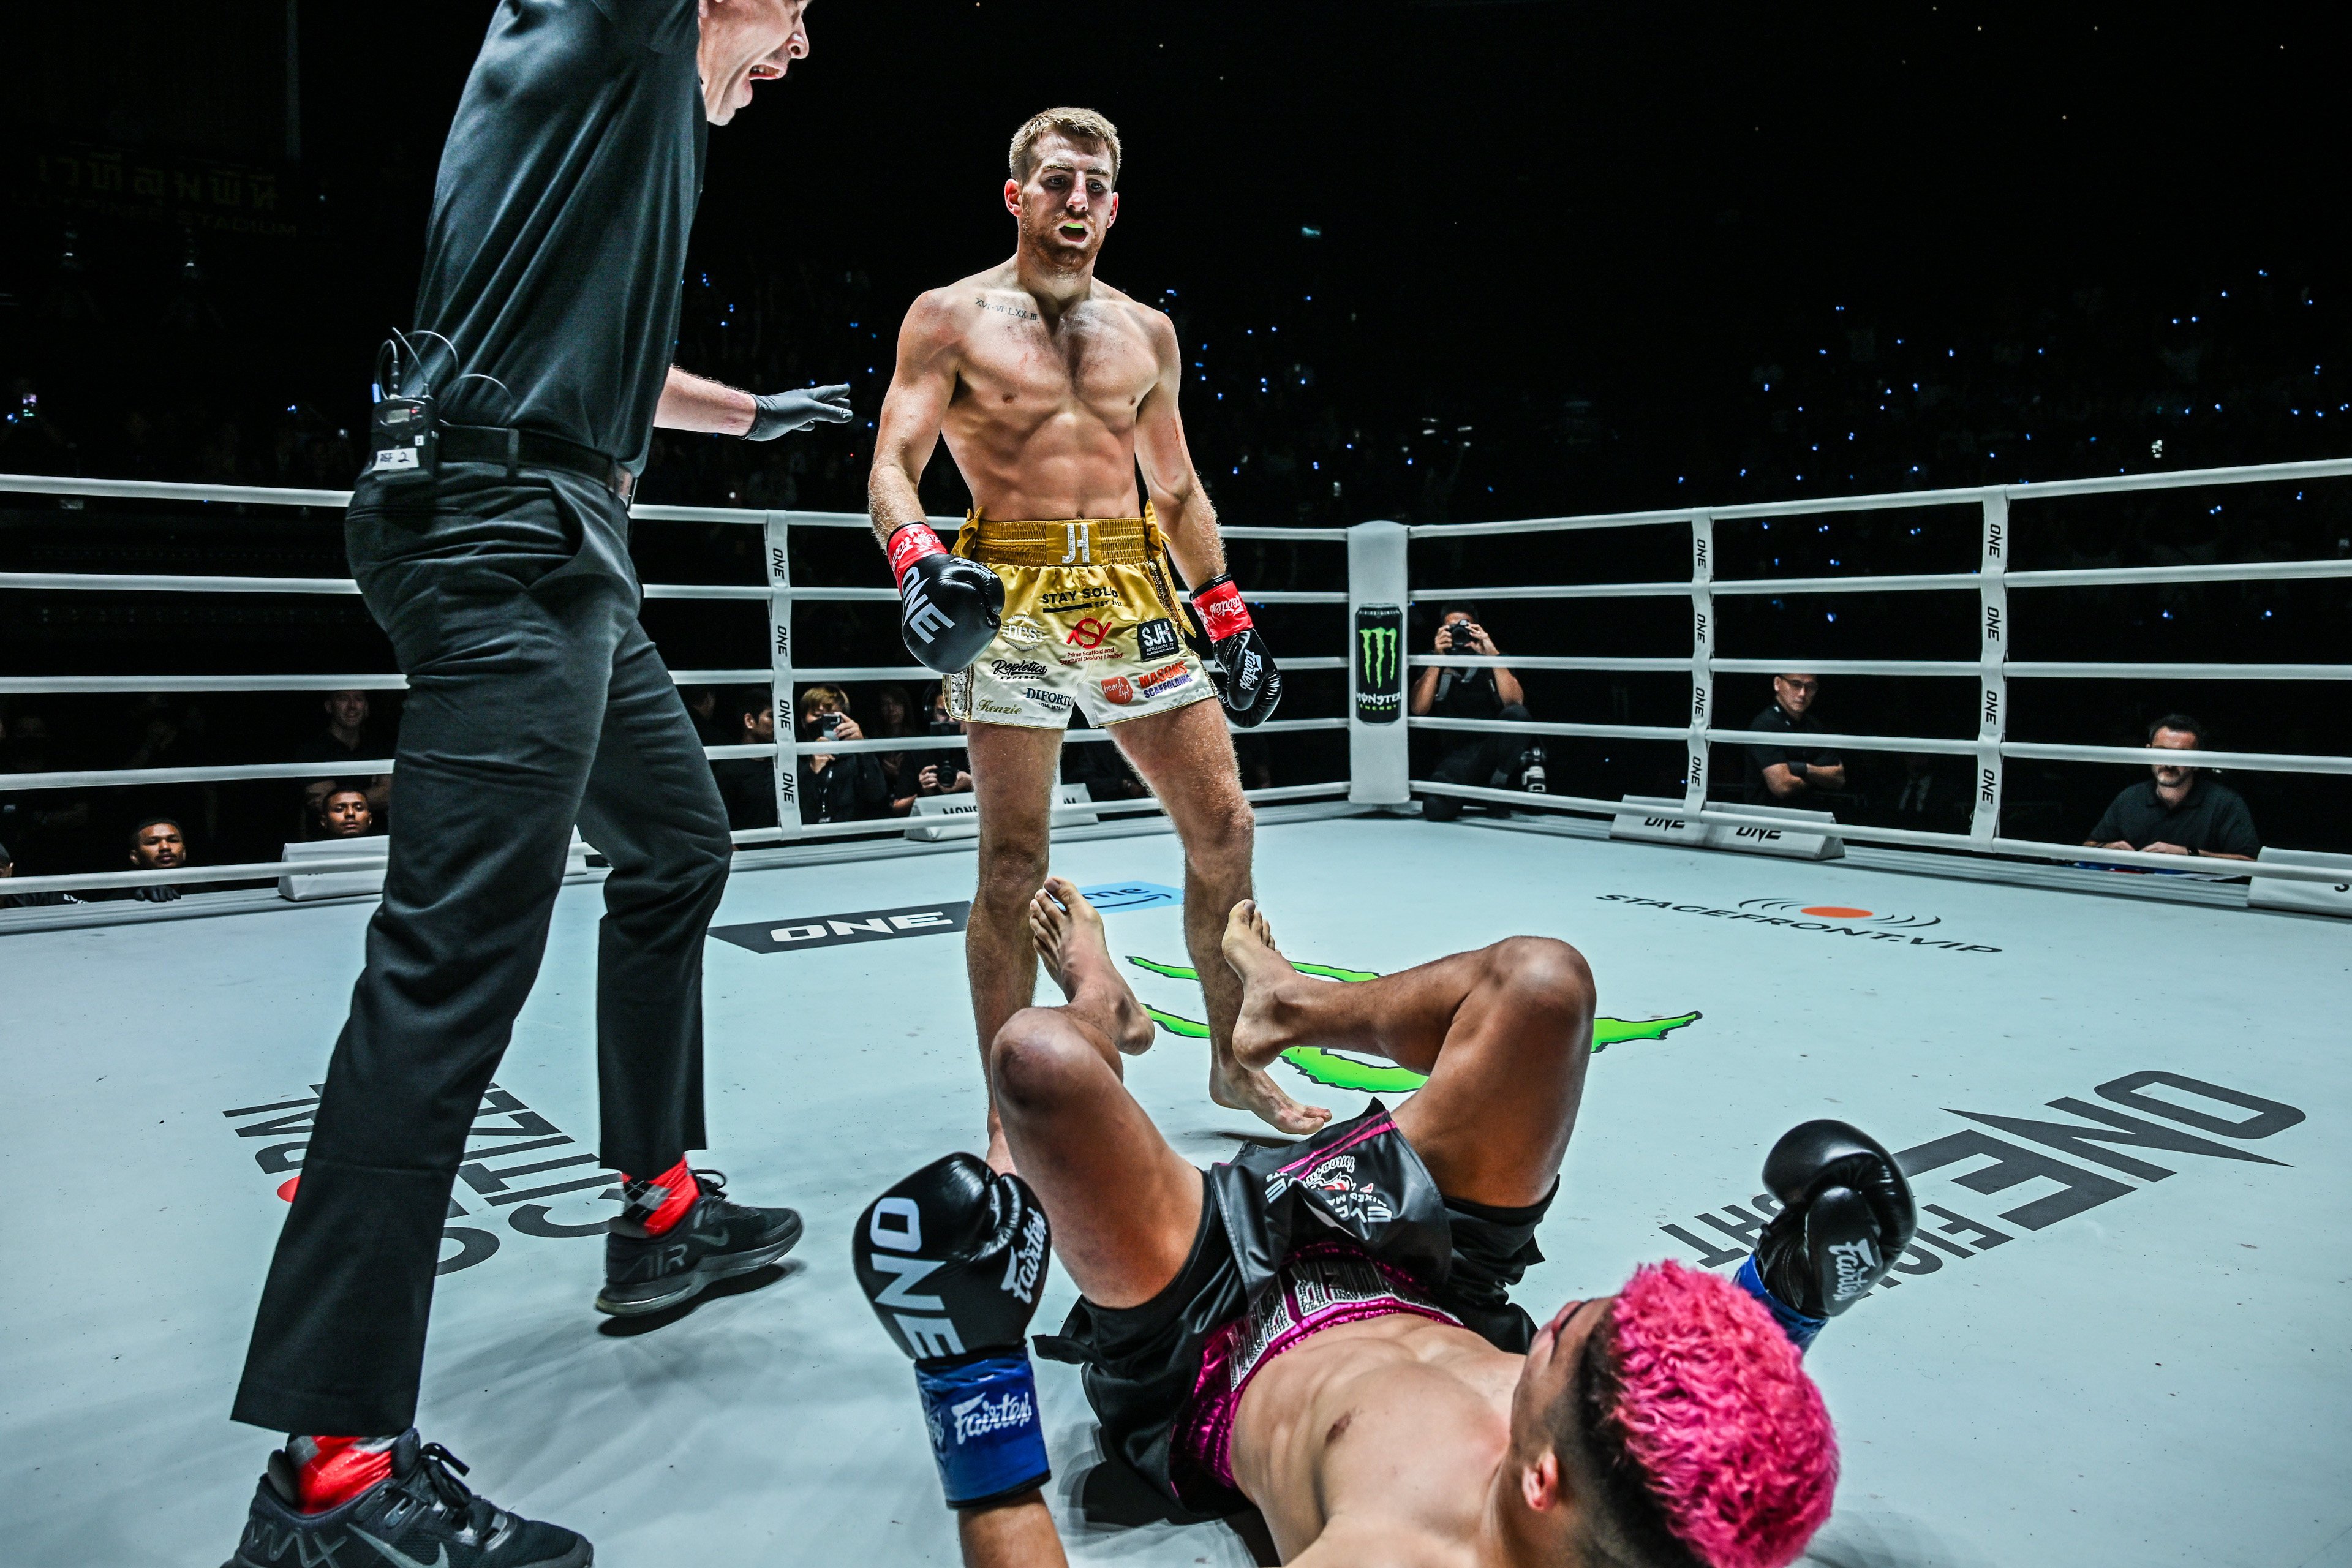 Jonathan Haggerty knocks down Fabricio Andrade to become a two-sport champion at ONE Fight Night 16. Photo: ONE Championship